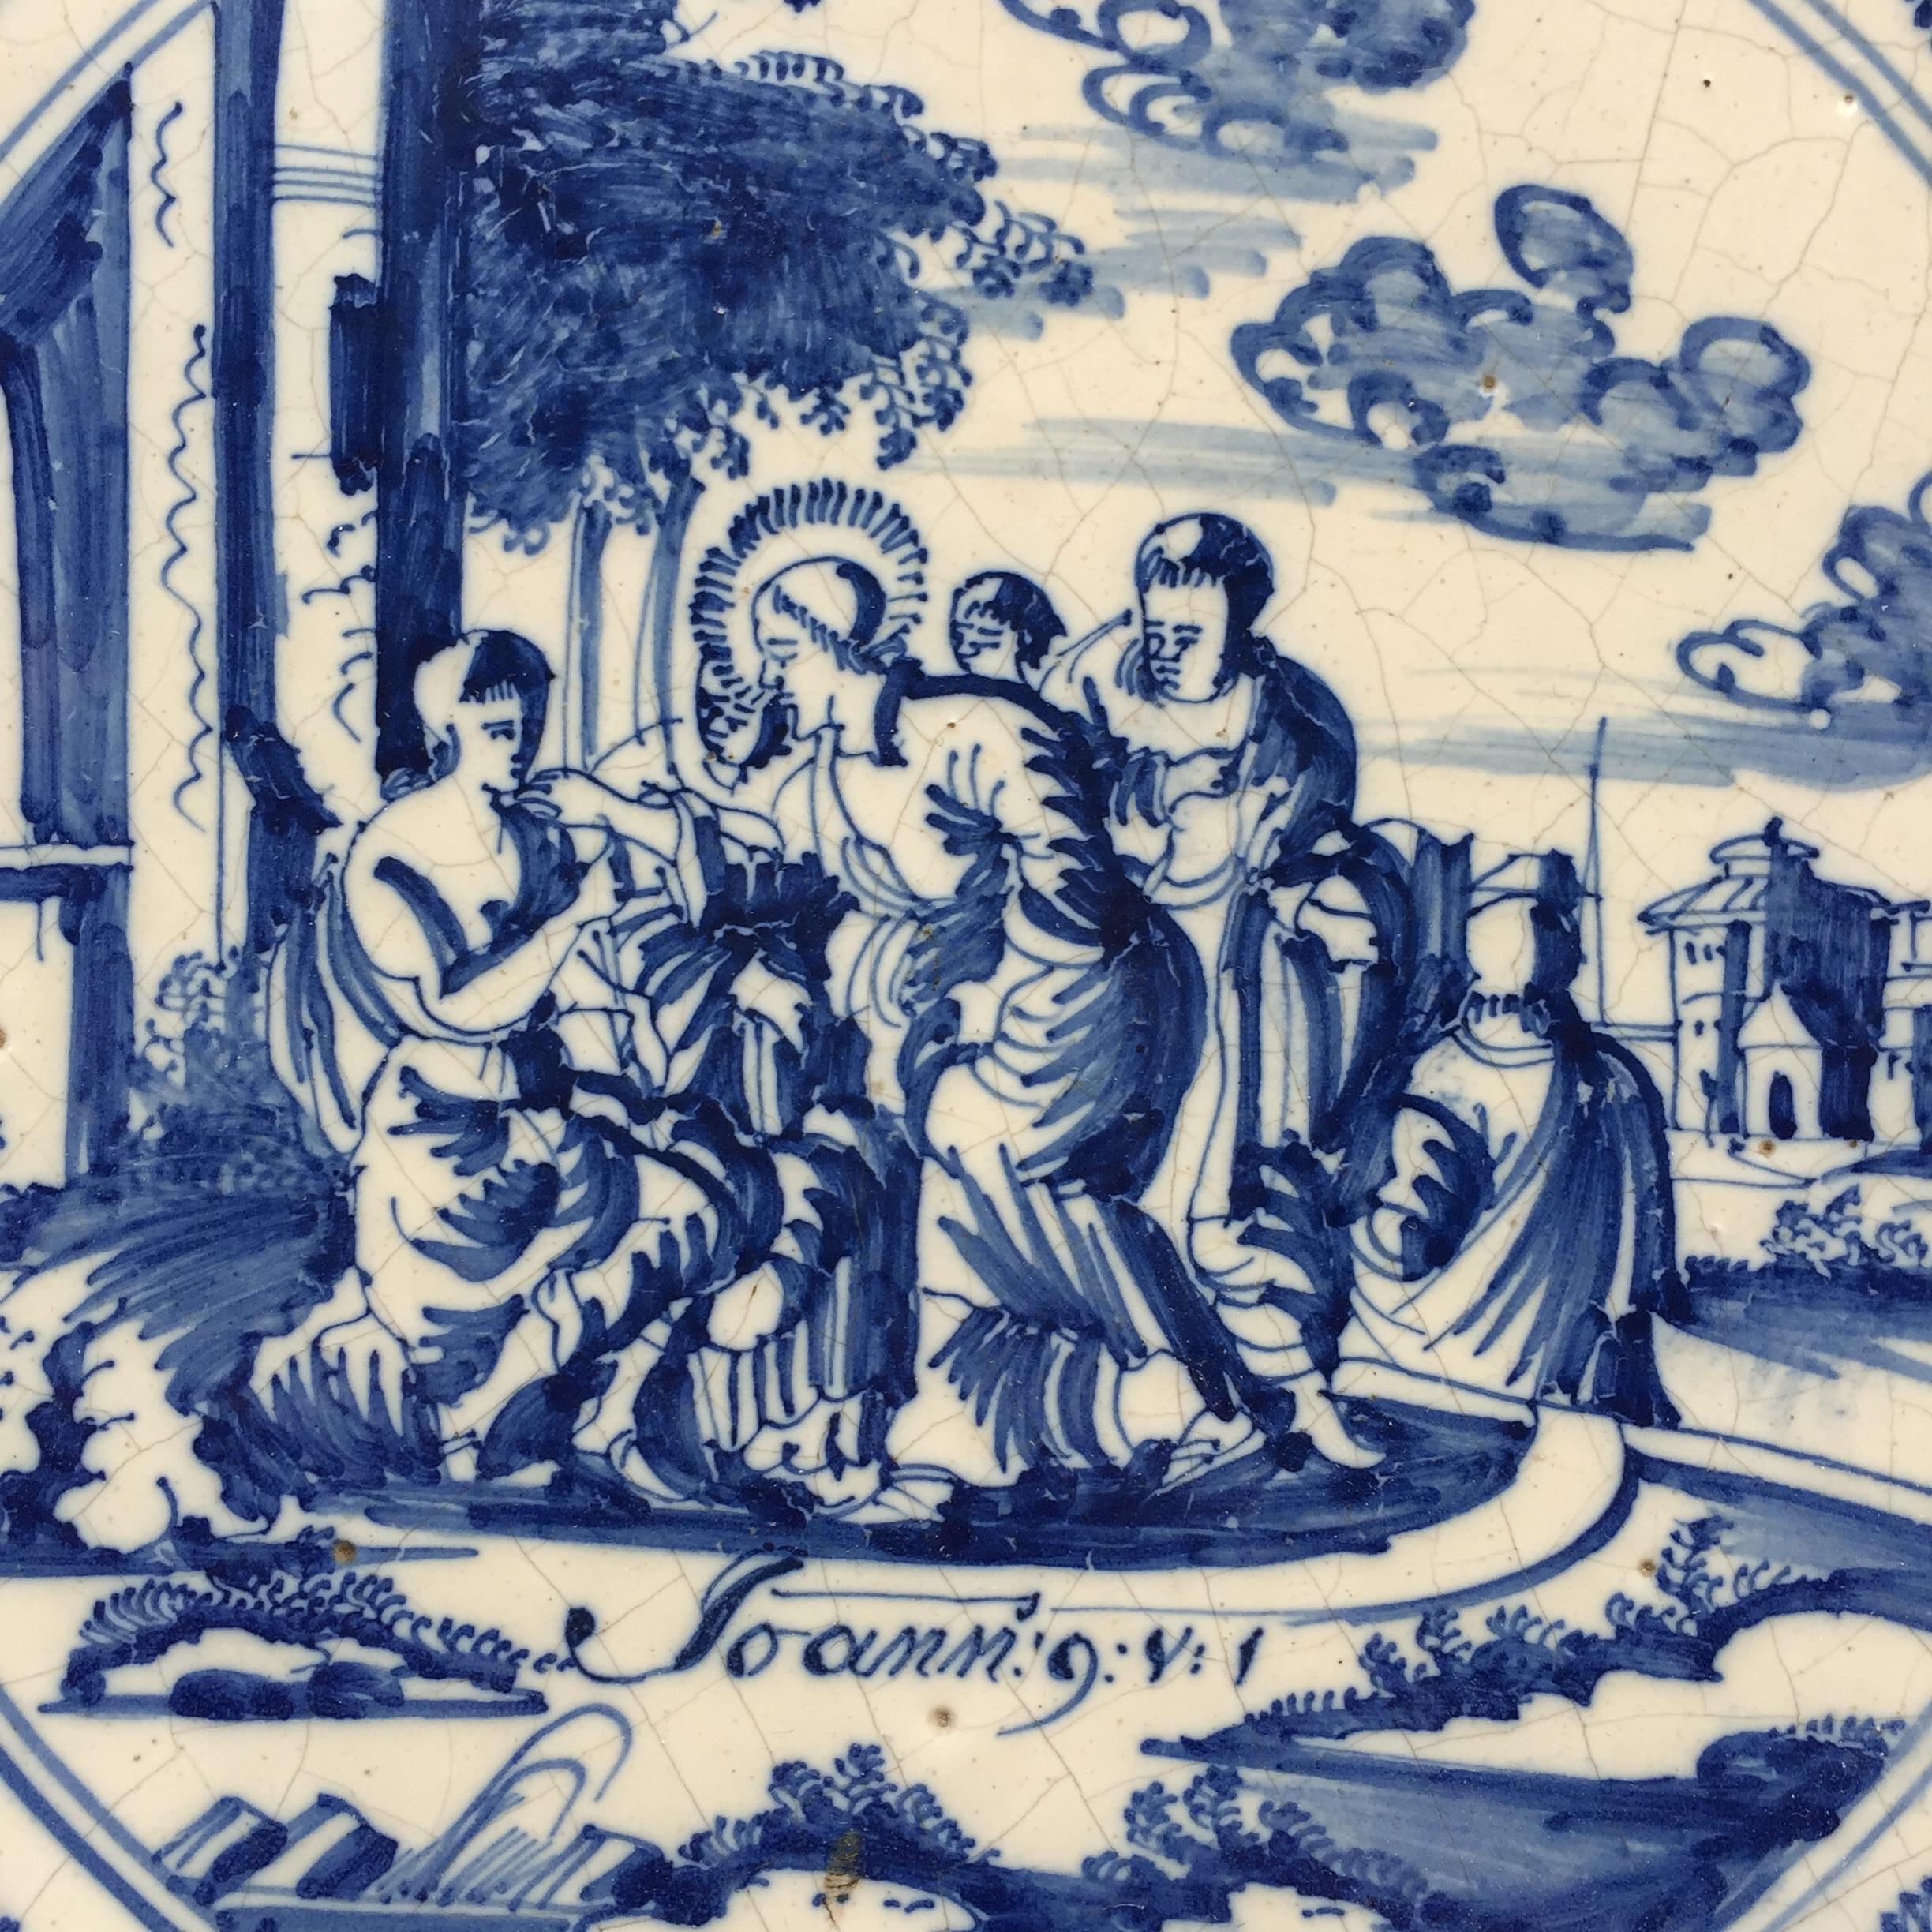 The Netherlands
Amsterdam
Circa 1725 – 1775

A fine blue and white Dutch tile with a New Testament biblical decoration of Jesus healing a blind born man, John 9 v 1.
These series of tiles with biblical stories from Amsterdam are well known for their